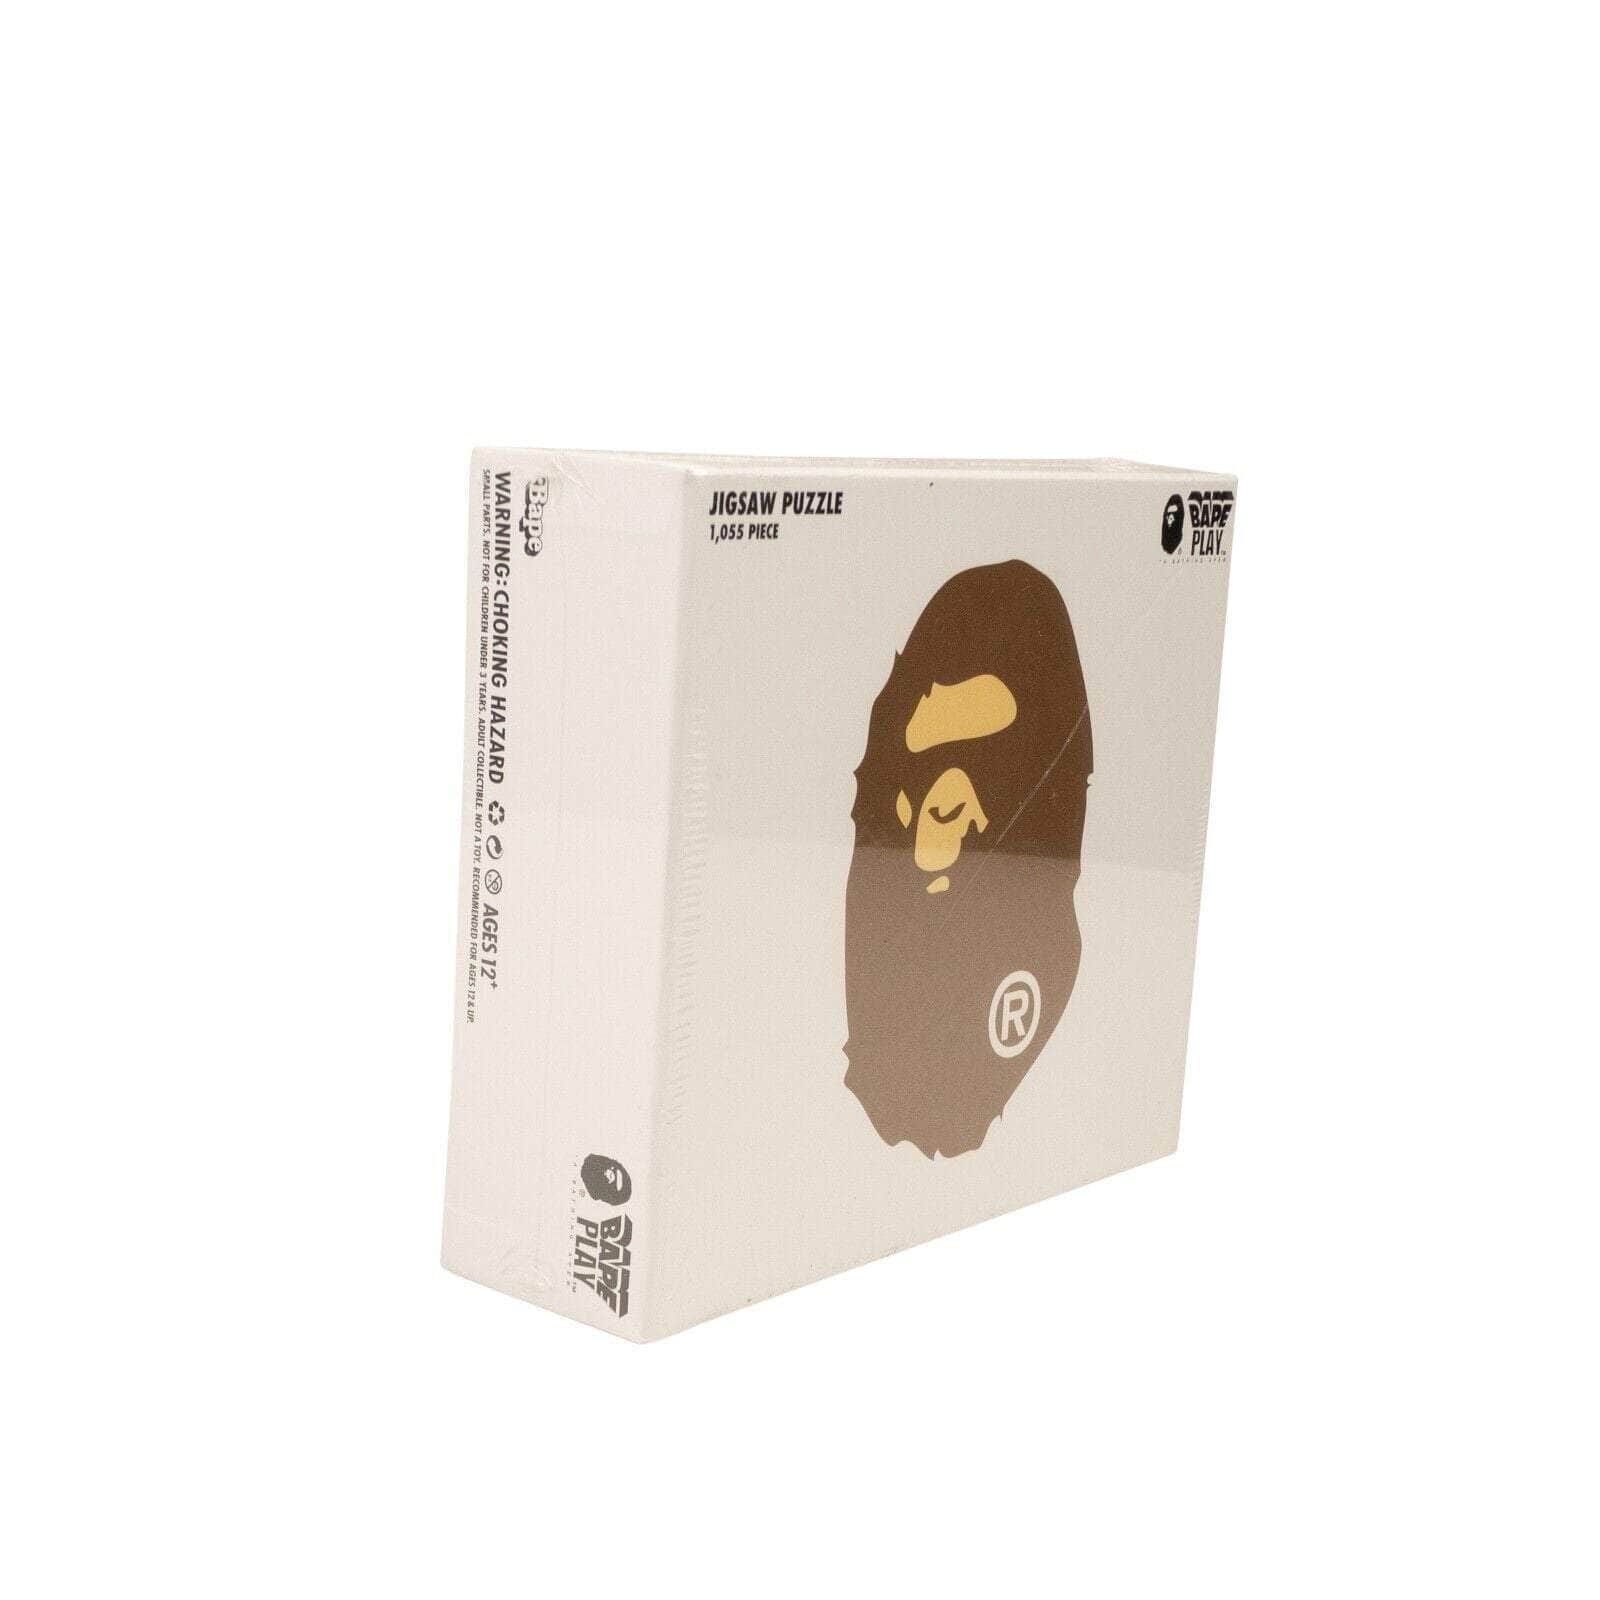 Bape bape, channelenable-all, chicmi, couponcollection, main-accessories, shop375, size-os, stationary-toys, under-250 OS Brown Ape Head Jigsaw Puzzle BAP-XACC-0025/OS BAP-XACC-0025/OS